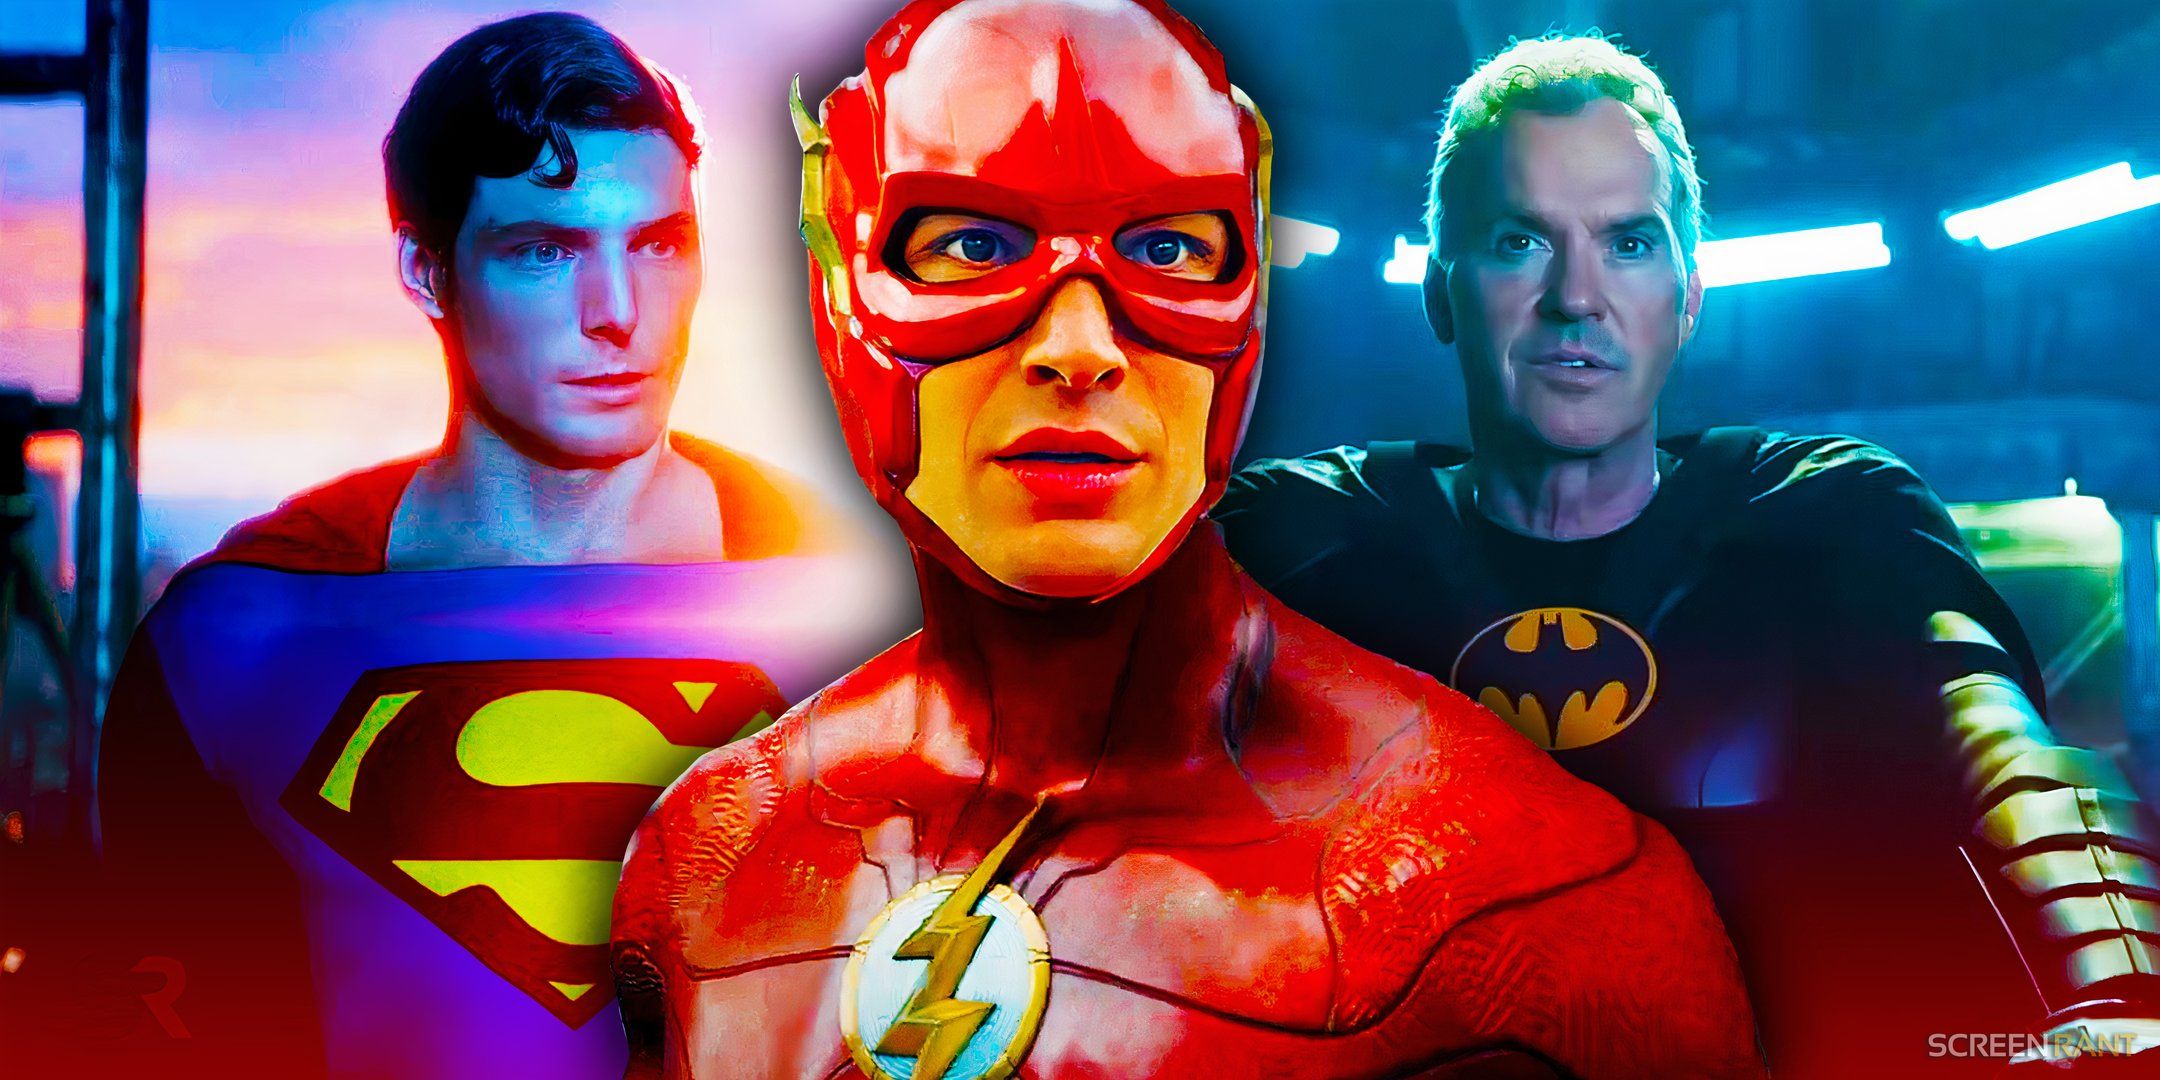 Christopher Reeve's Superman, Ezra Miller's The Flash, and Michael Keaton's Batman in The Flash